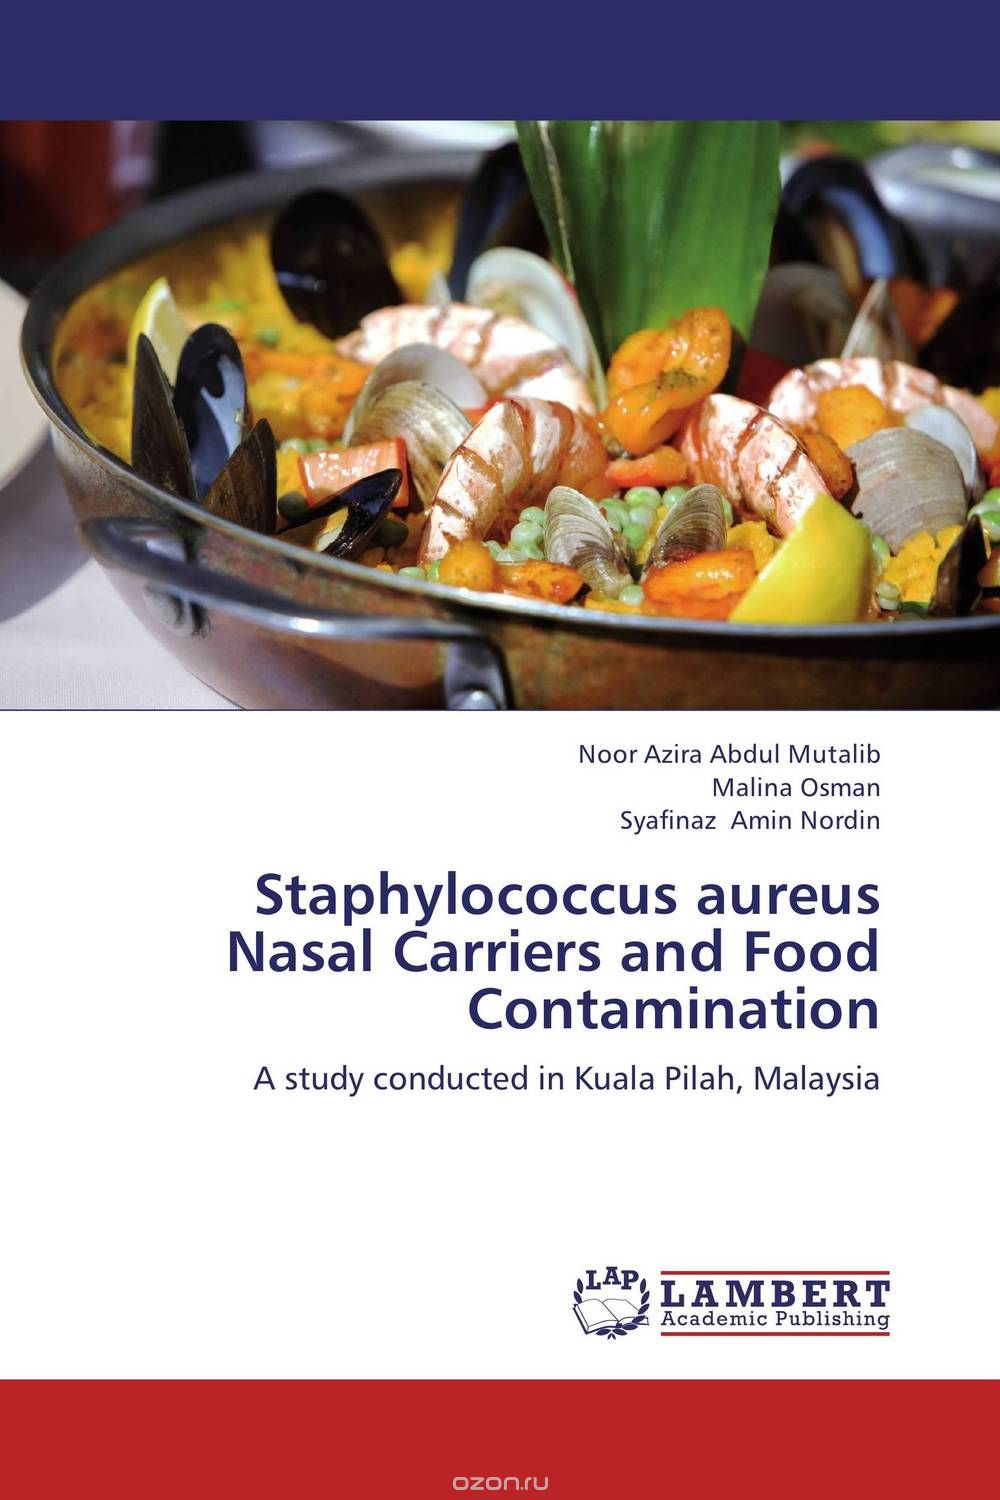 Staphylococcus aureus Nasal Carriers and Food Contamination